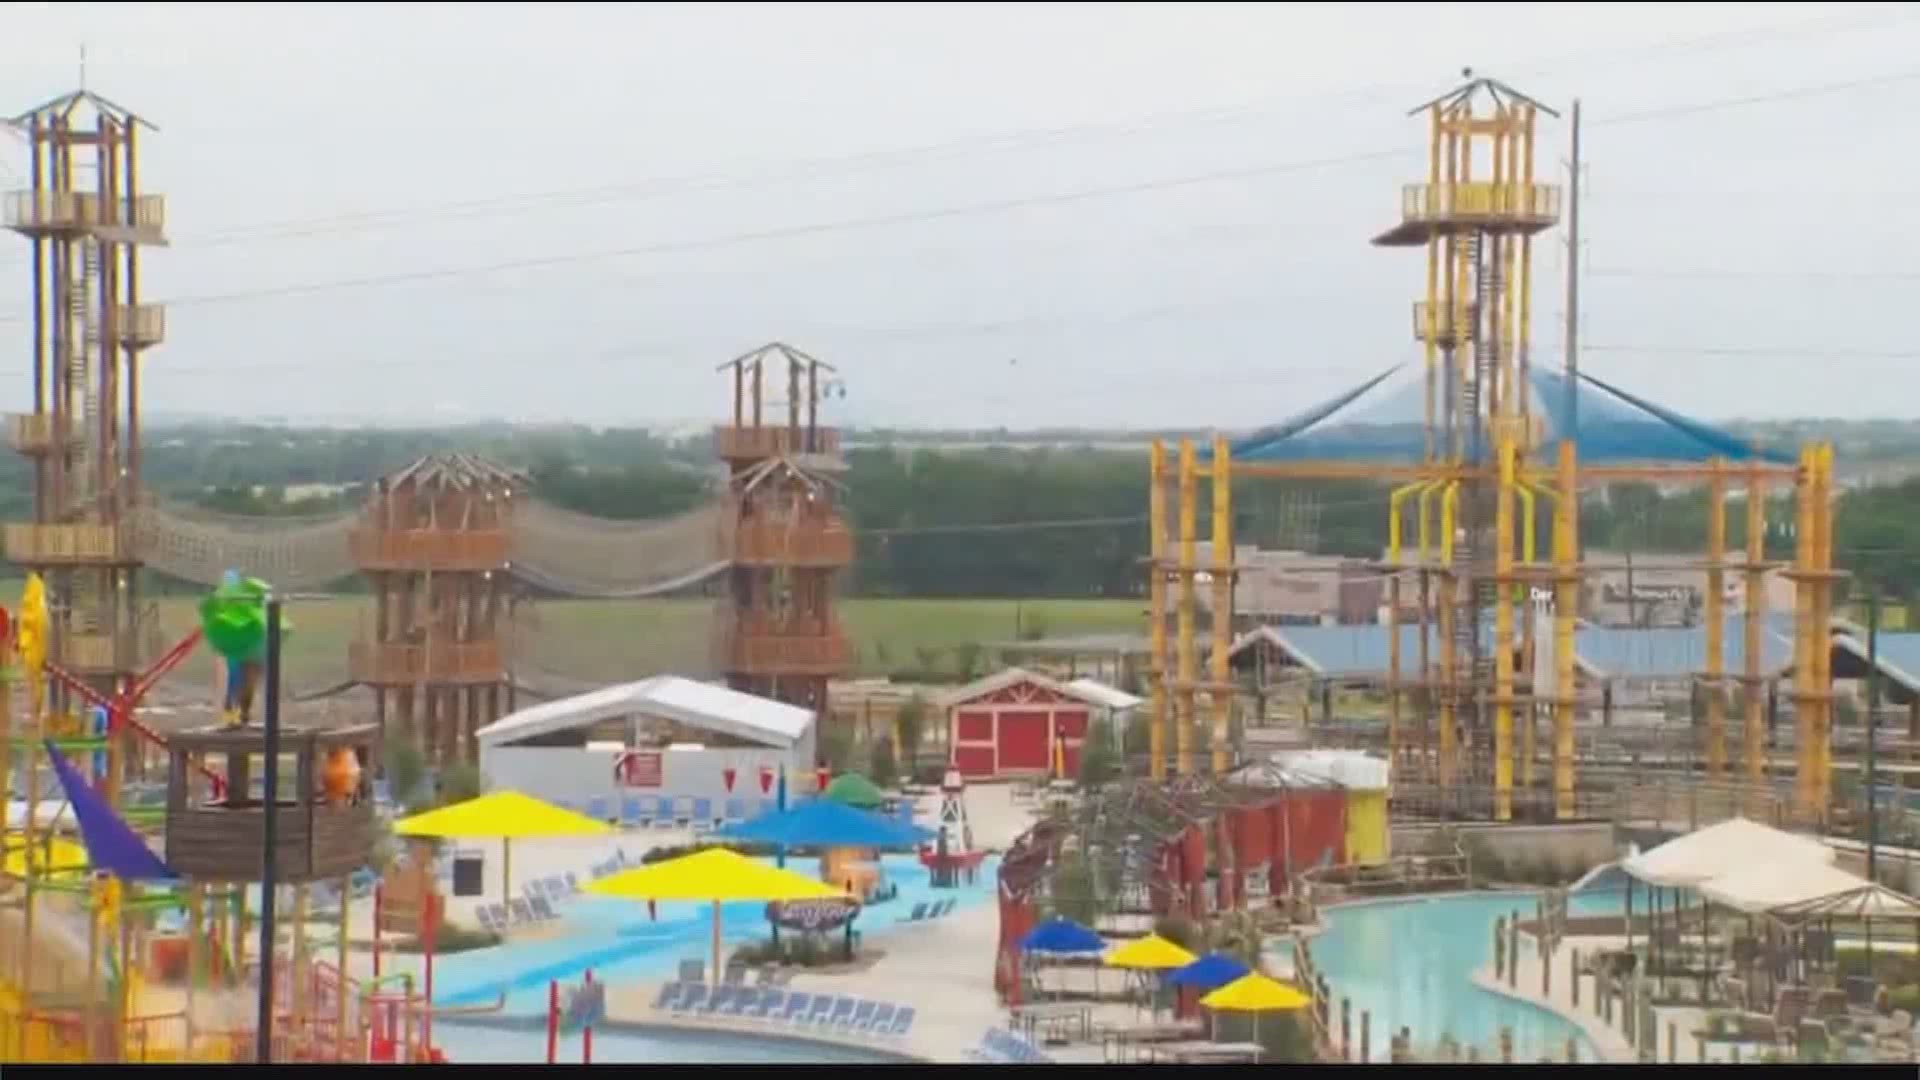 Owners of the park say they are not ready to open over Memorial Day weekend as planned due to the State's latest order.